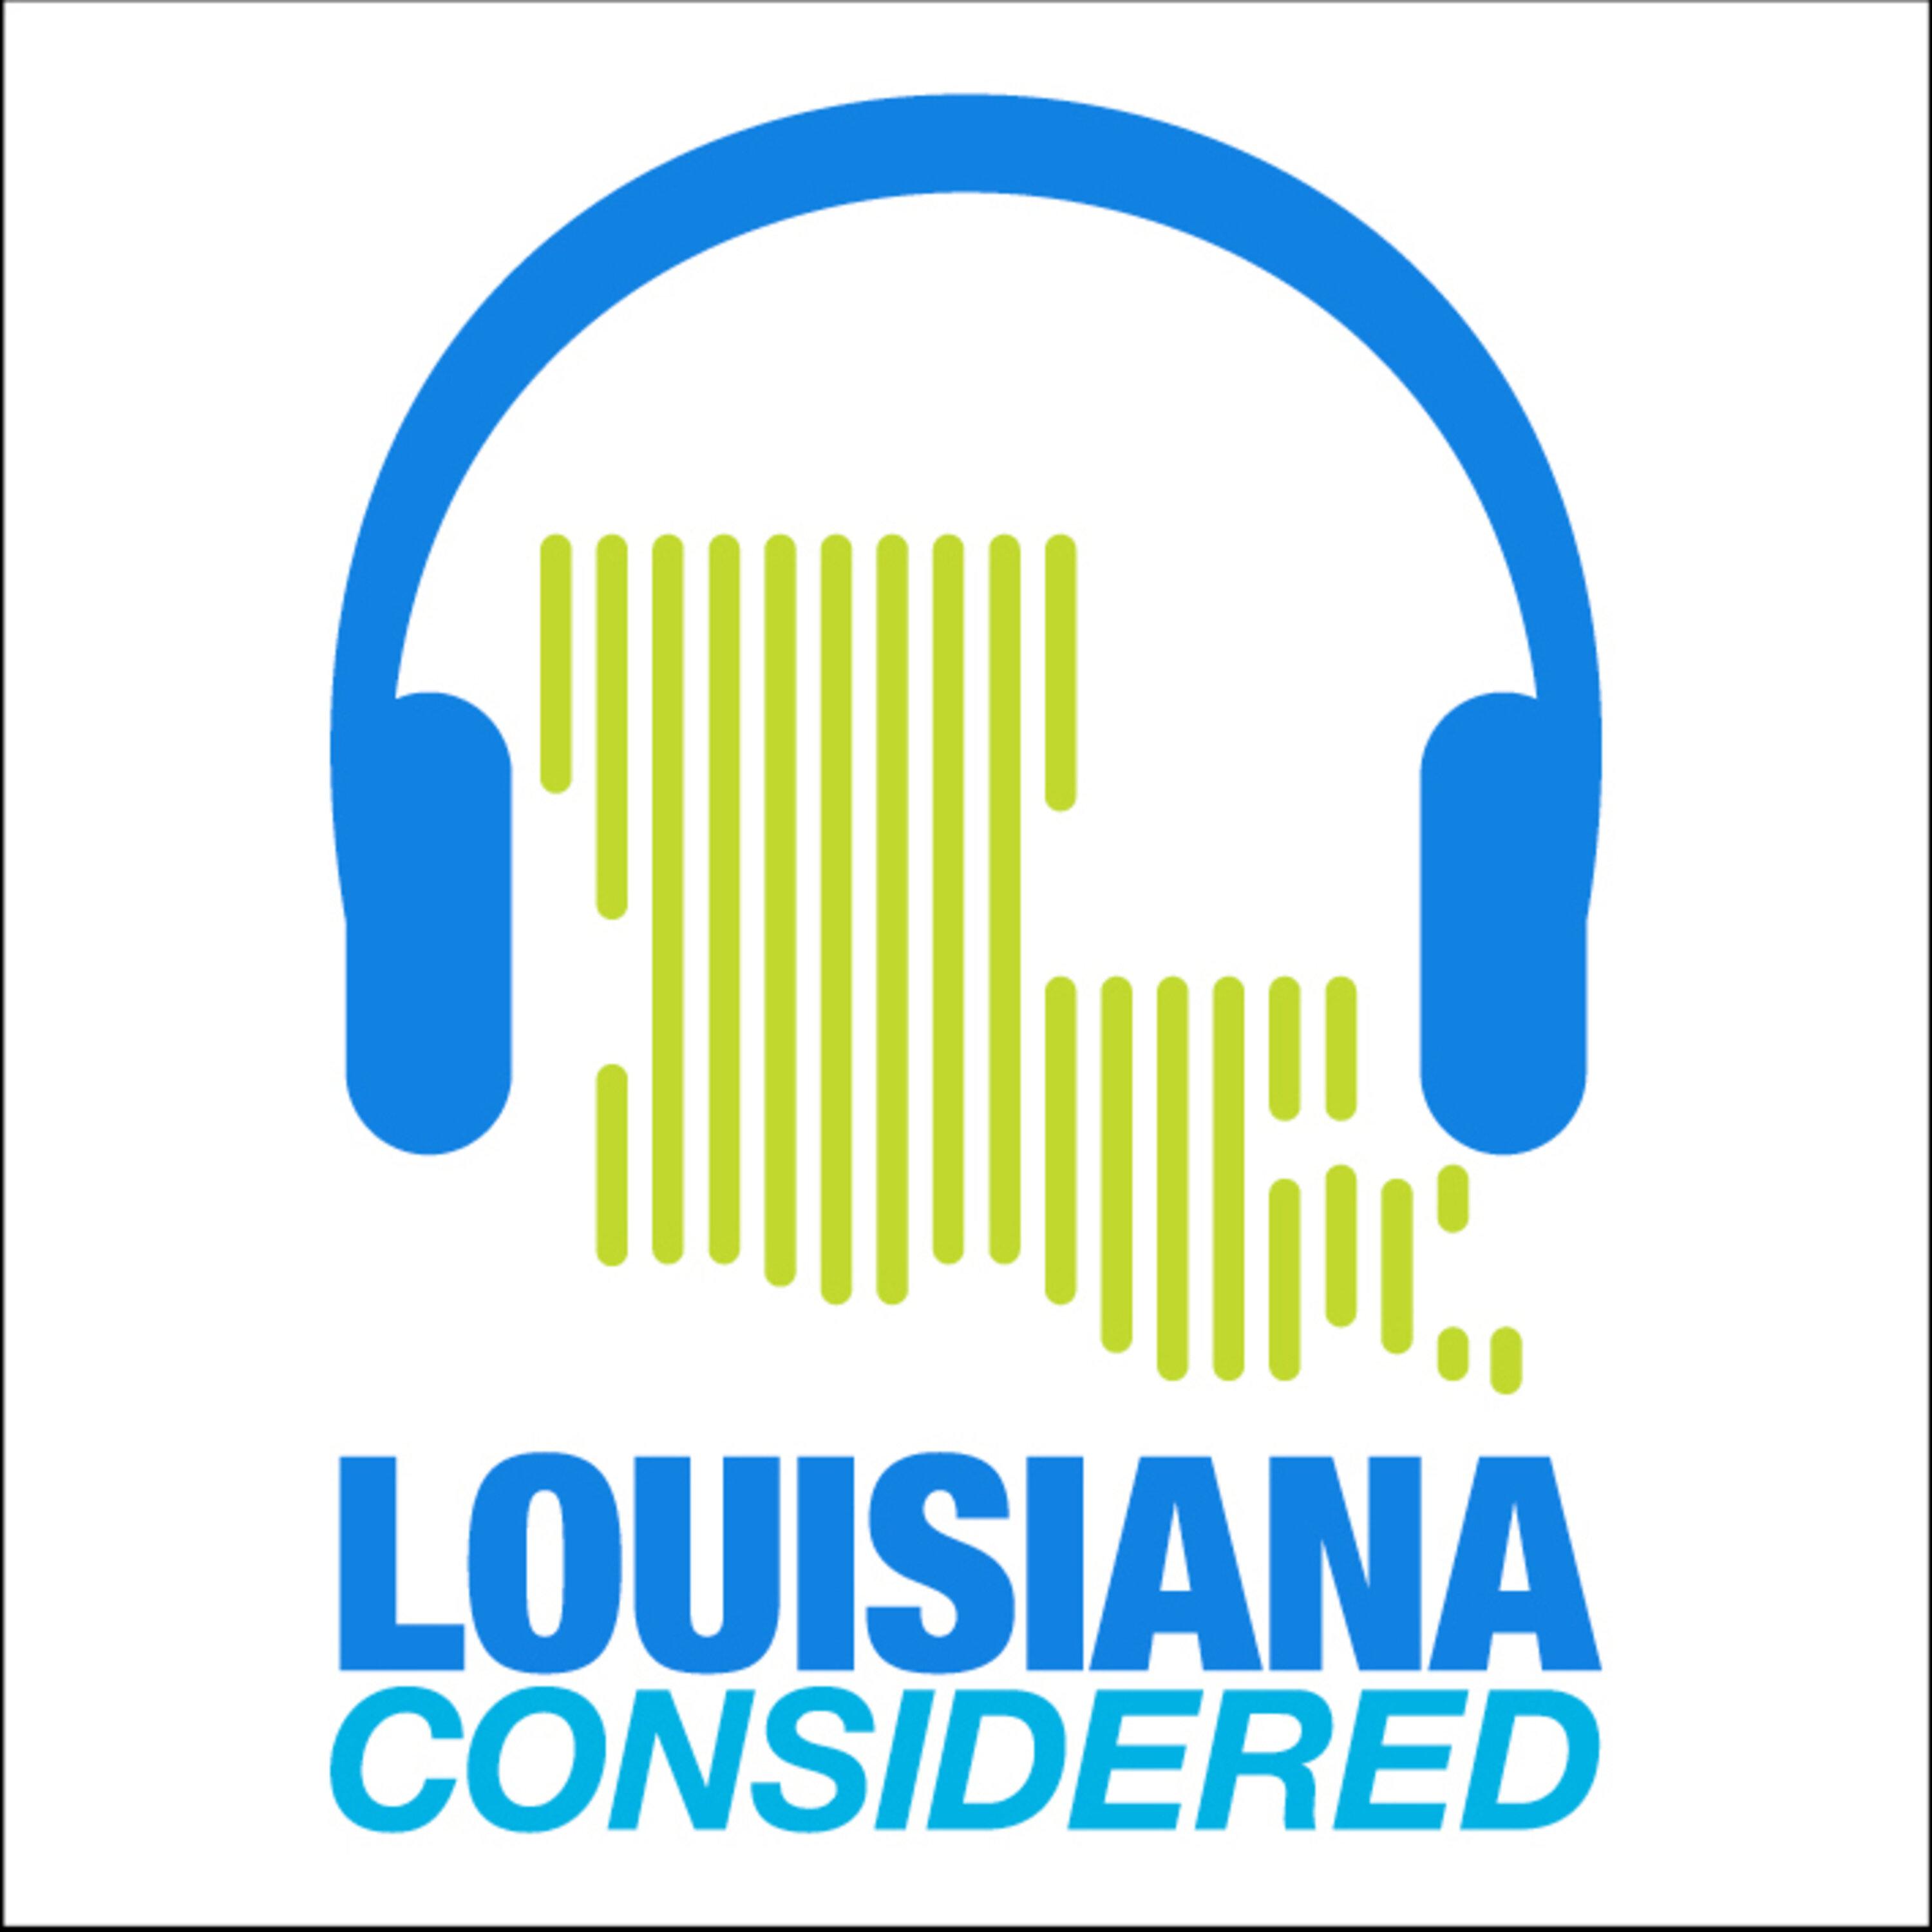 Thumbnail for "Louisiana Considered: Upcoming music and architecture appreciation events in New Orleans".